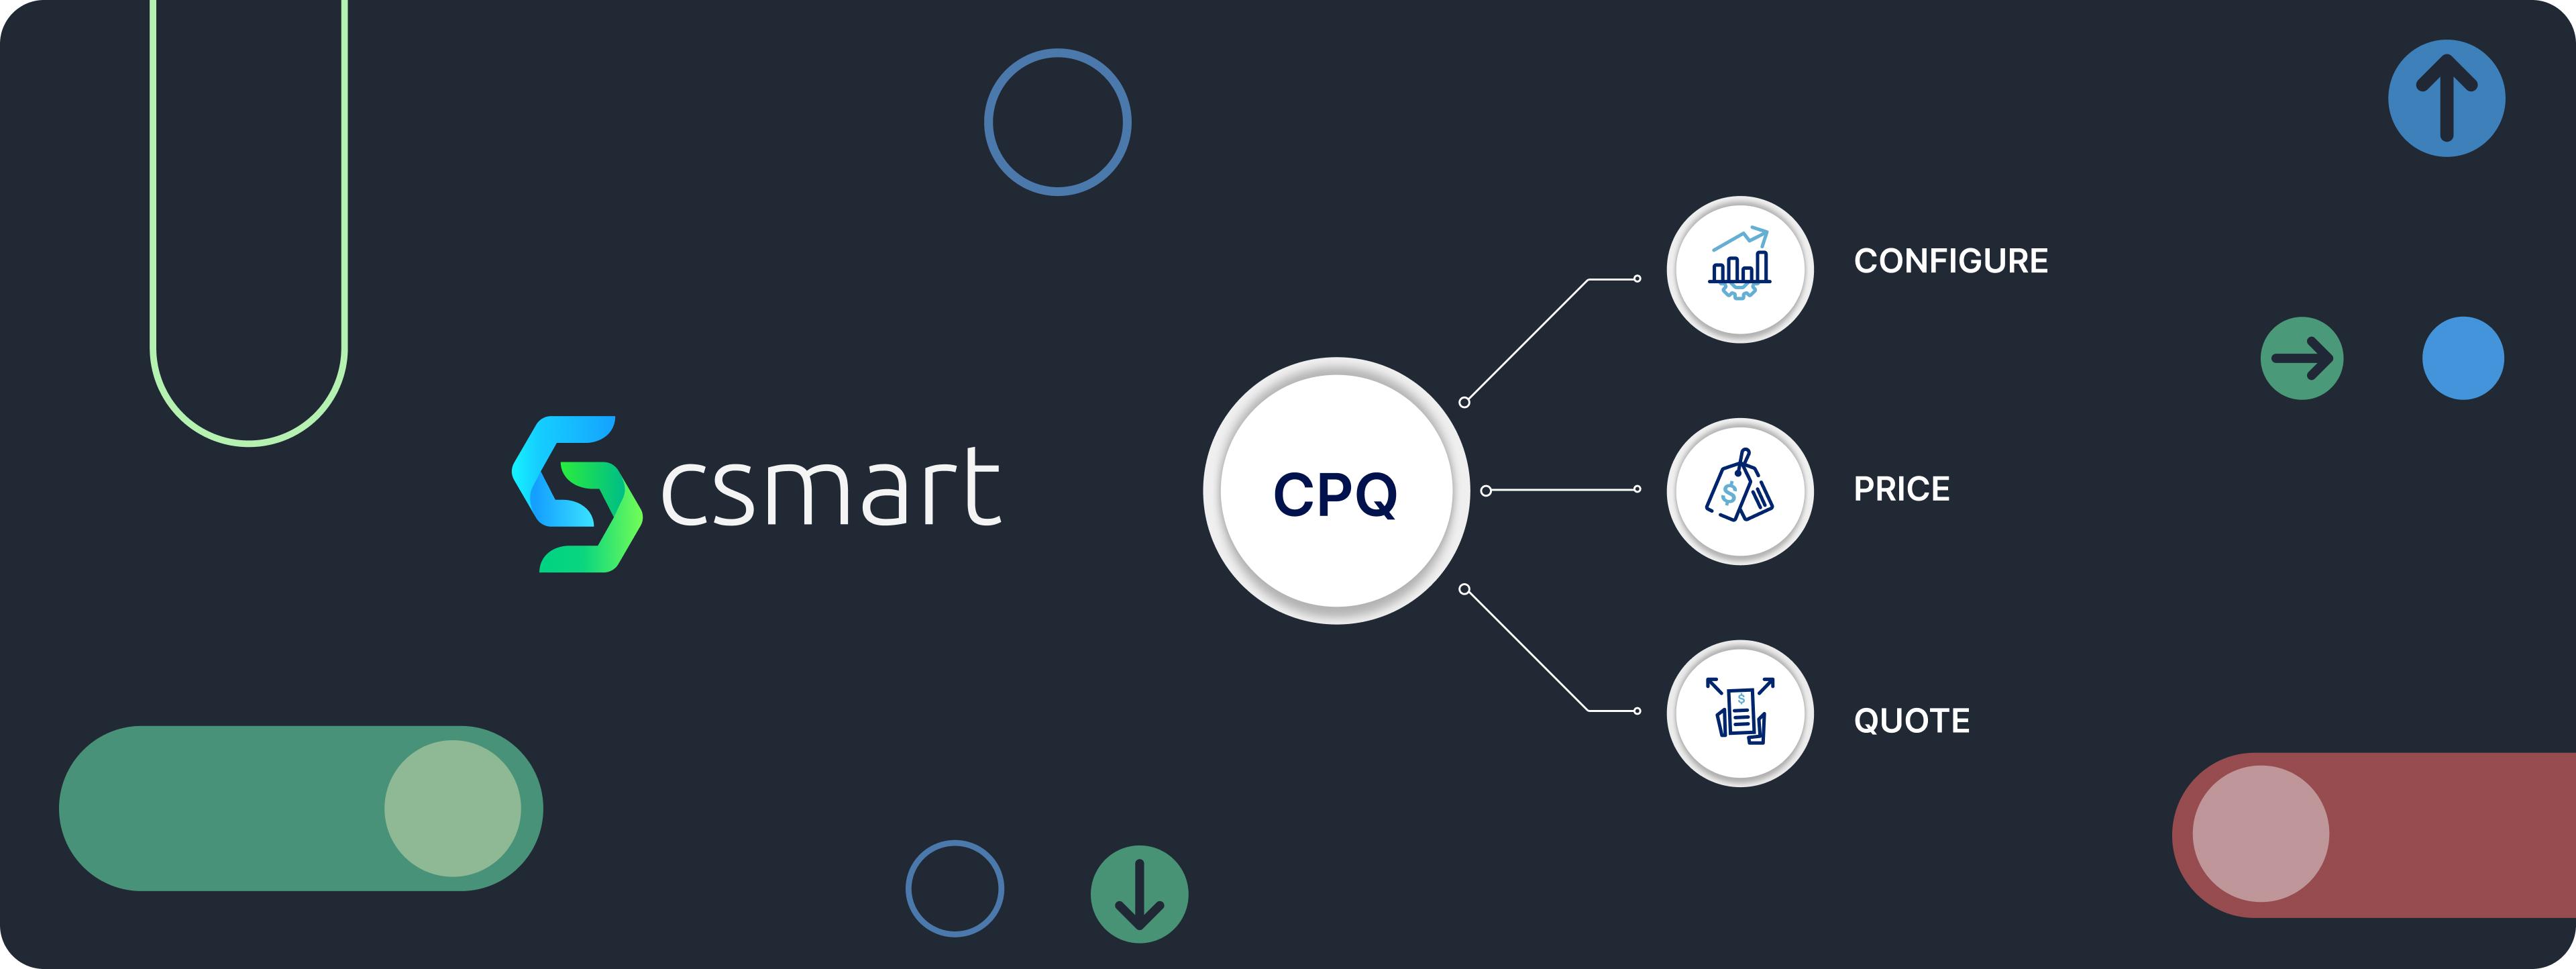 Mastering Complexity: The Future of Telecom Sales with CPQ